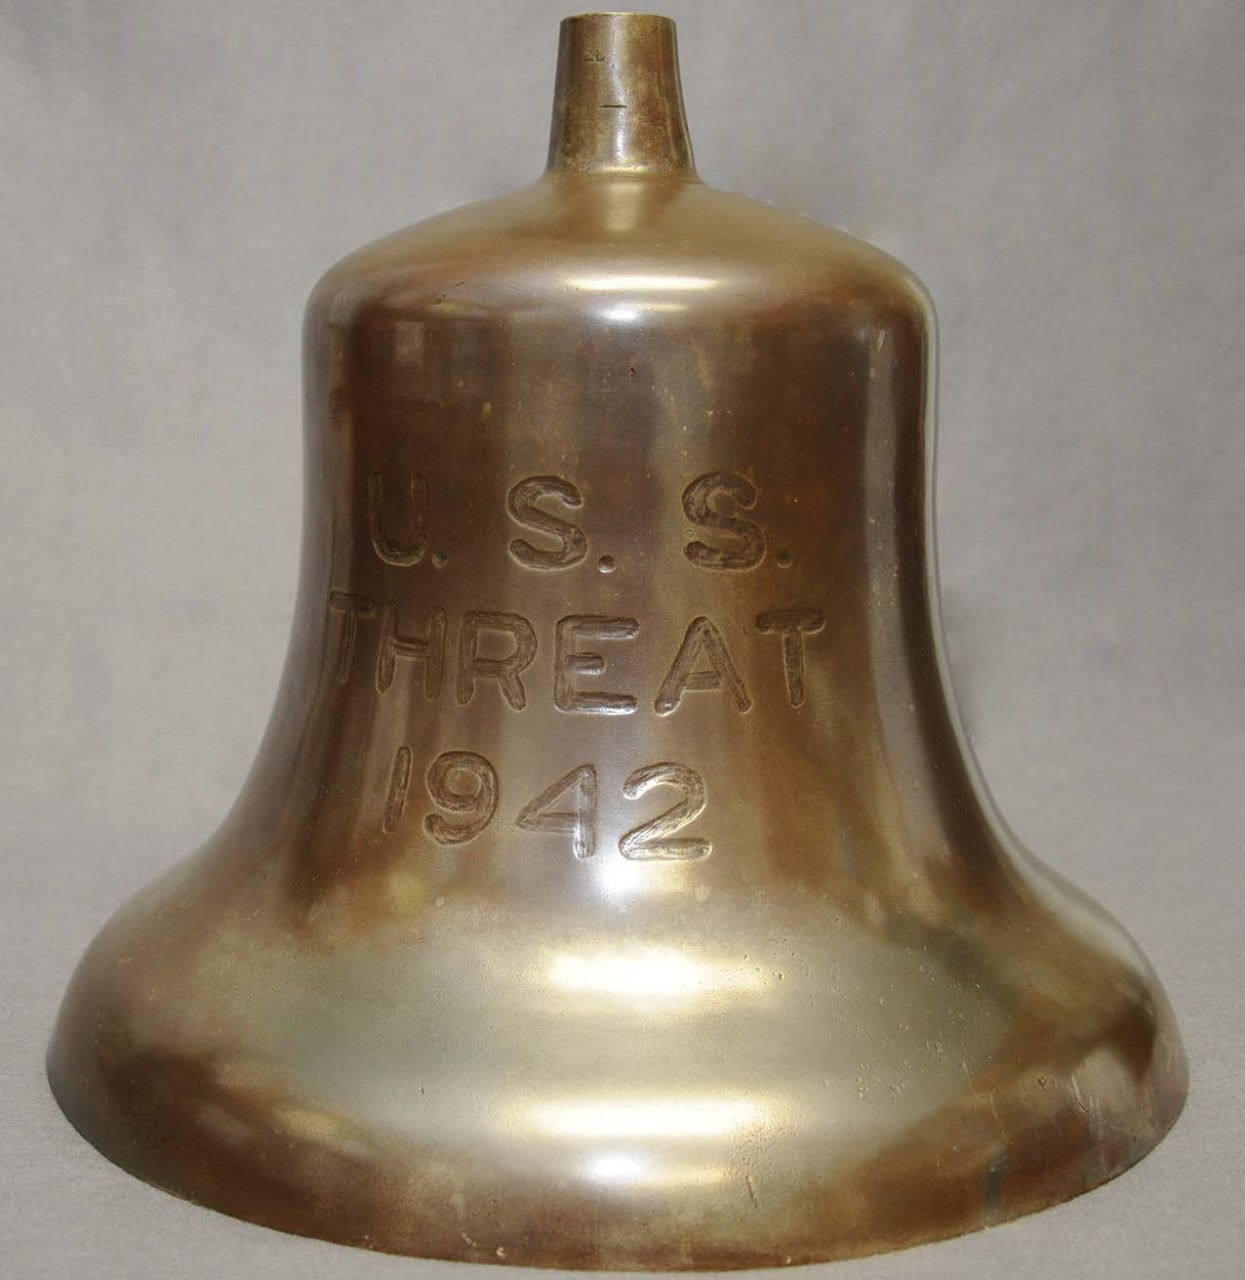 Brass bell engraved with the text U.S.S. Threat 1942